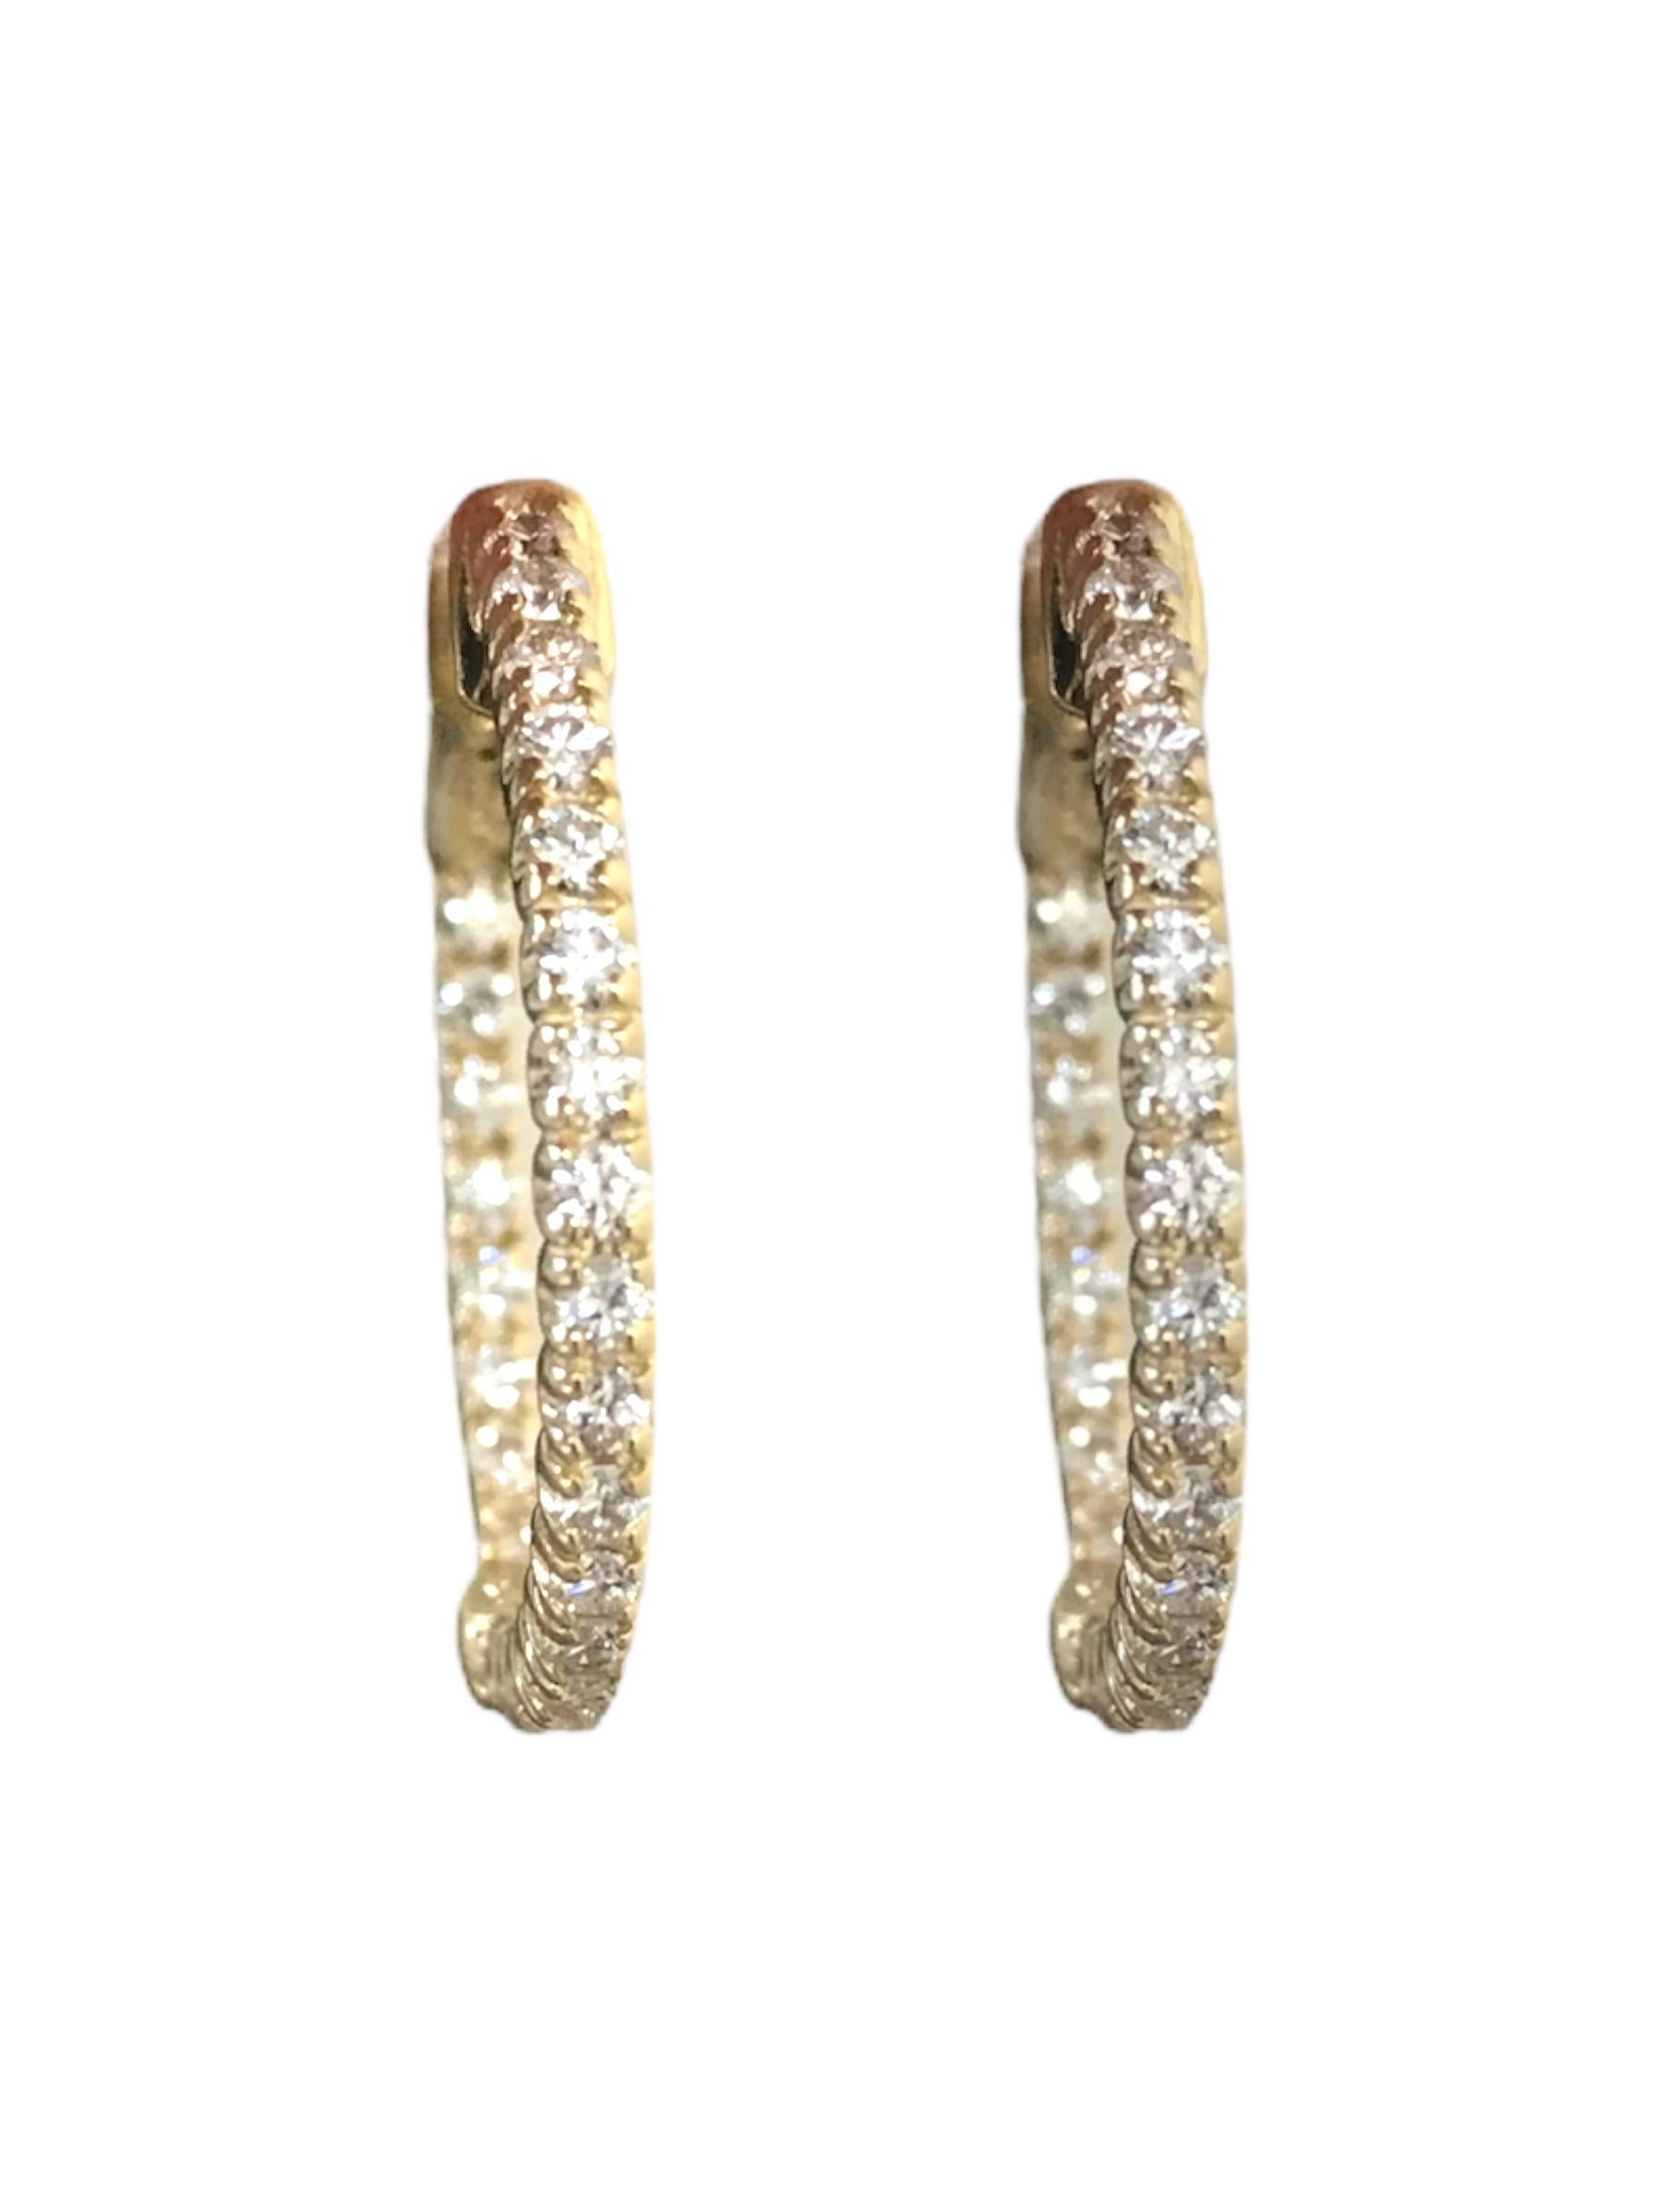 Classy & Simple!!
Perfect for every occasion.

Earring Details
Age: New
Material: 14K Yellow Gold
Weight: 7.5 Grams
Diamond Weight: 1.0 Carat Total
Size: 25mm
Shape: Round
60 - 1.6mm Round Brilliant Cut Diamonds
Also Available In White